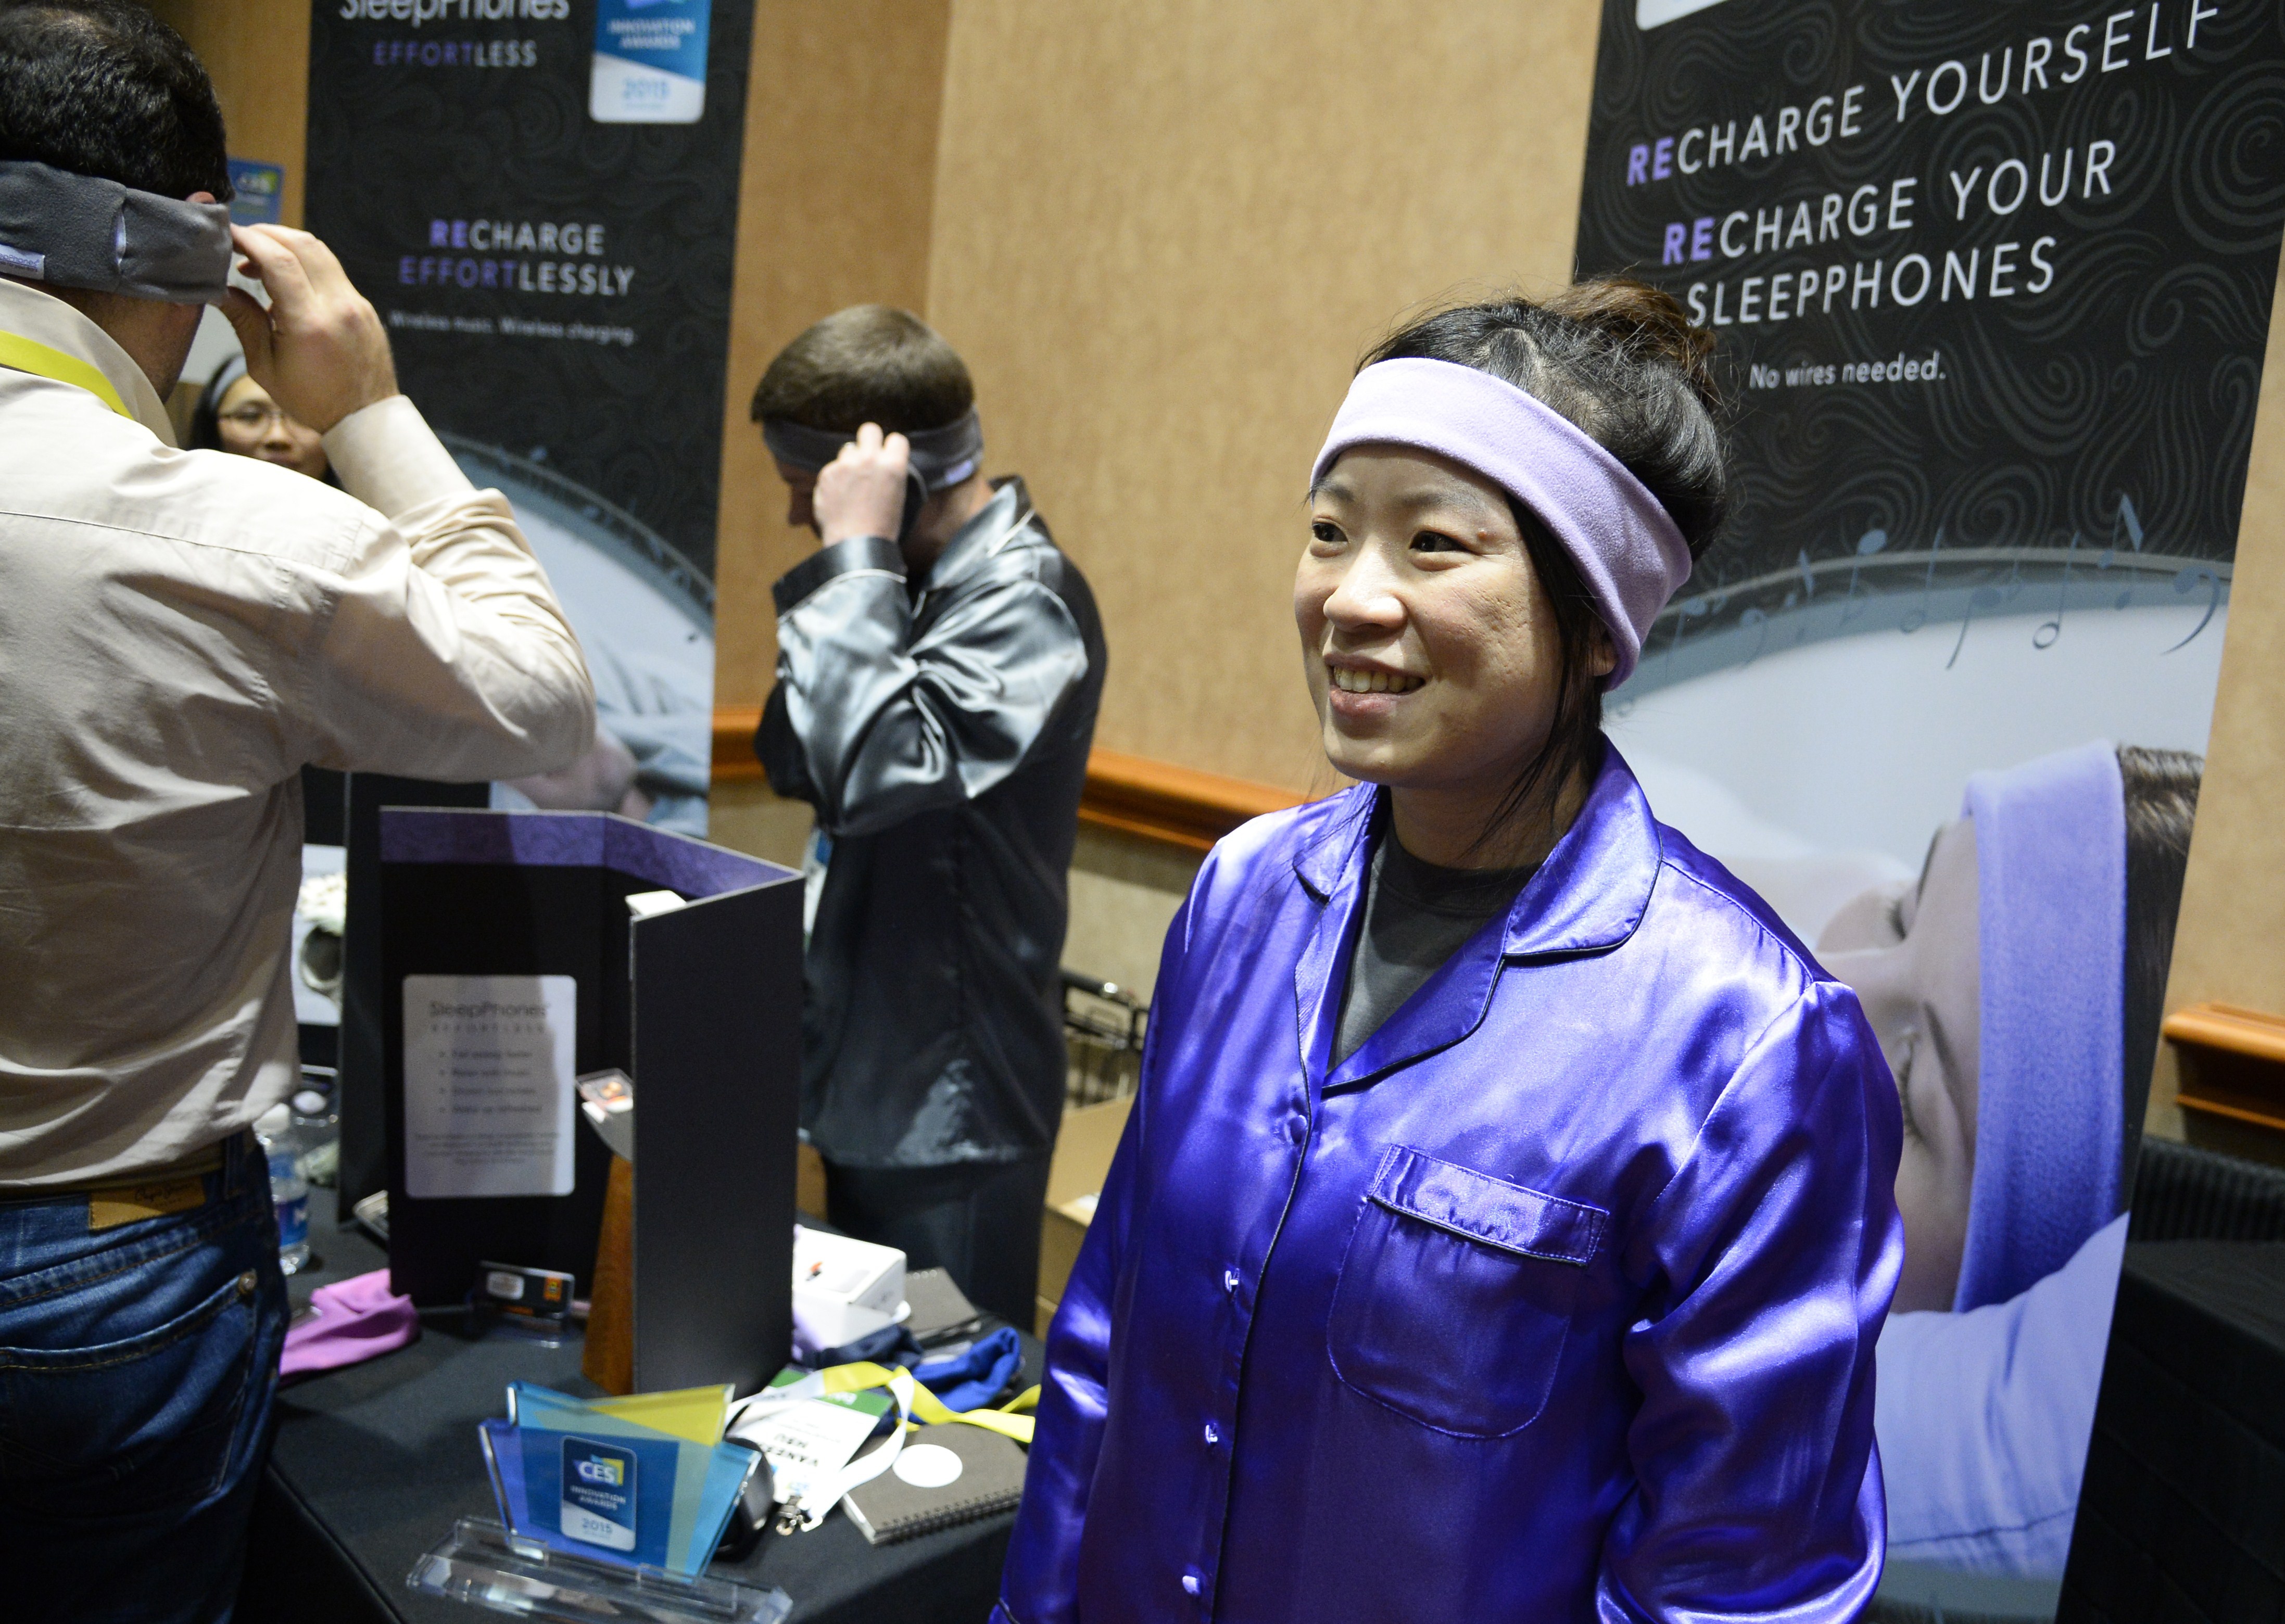 Dressed in pajamas, AcousticSheep LLC representative Venessa Hsu wears SleepPhones, a headband to help people to sleep better, during a press event at the Mandalay Bay Convention Center for the 2015 International CES on Jan. 4, 2015 in Las Vegas, Nevada. (Robyn Beck&mdash;AFP/Getty Images)